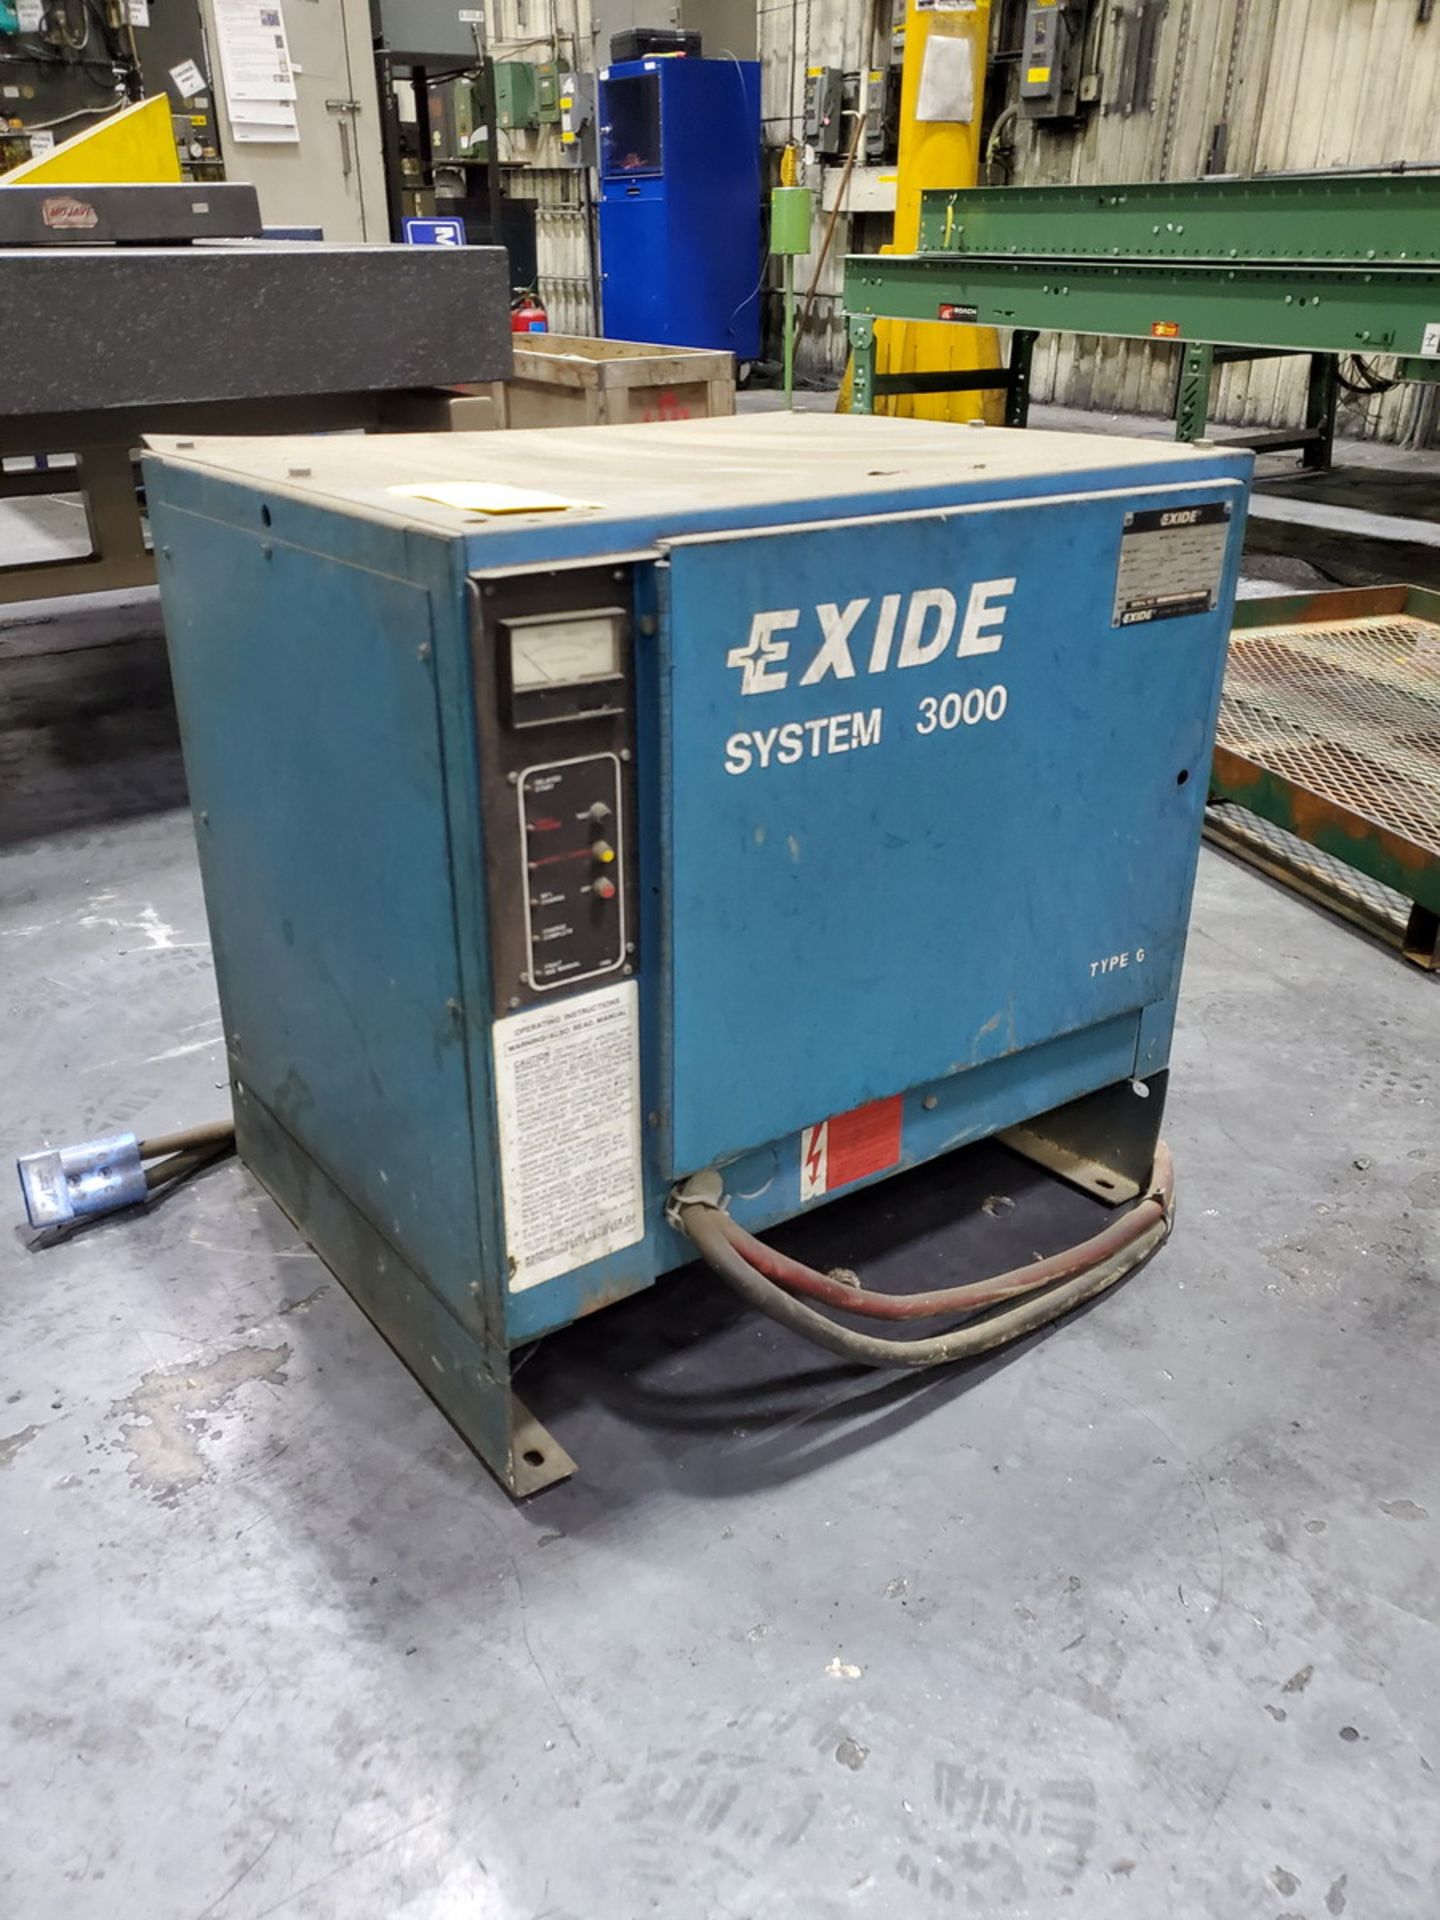 Exide Industrial Battery Charger 8hr Charge Time, 208/240/480V, 3PH, 60HZ - Image 2 of 6